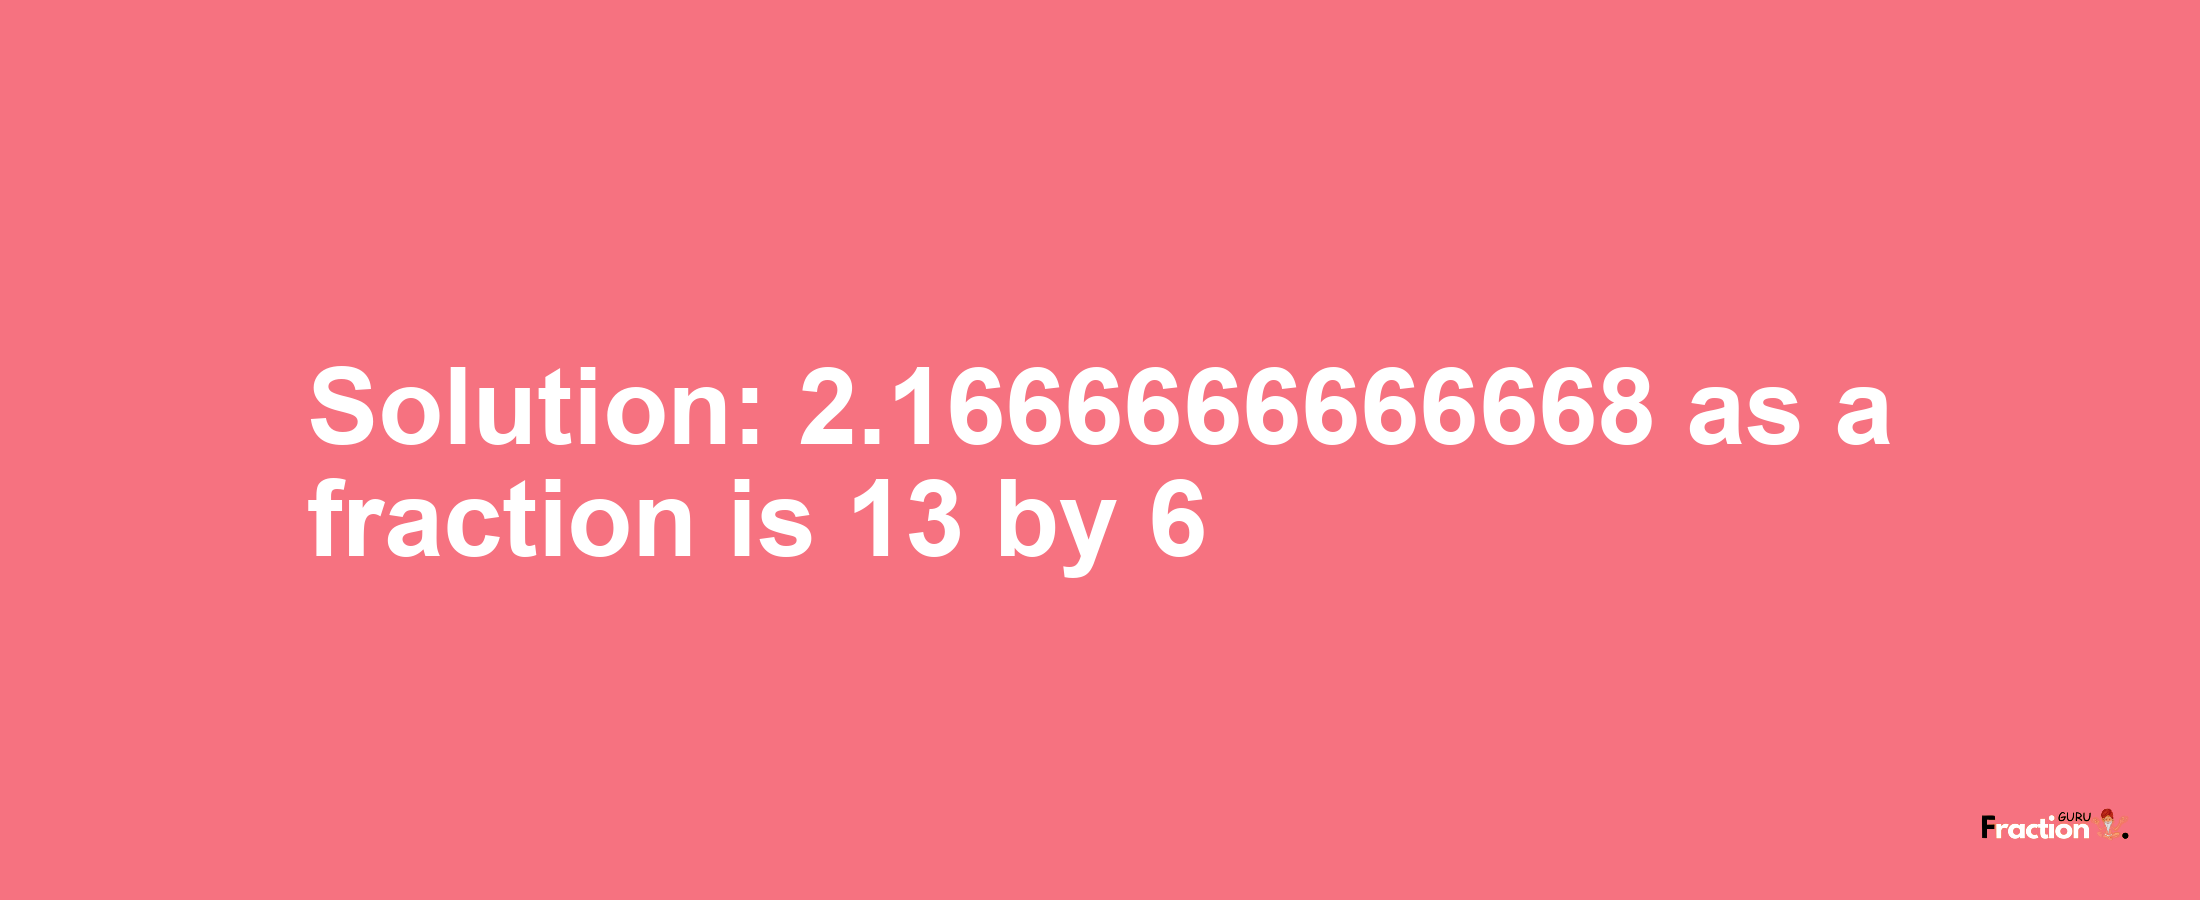 Solution:2.1666666666668 as a fraction is 13/6